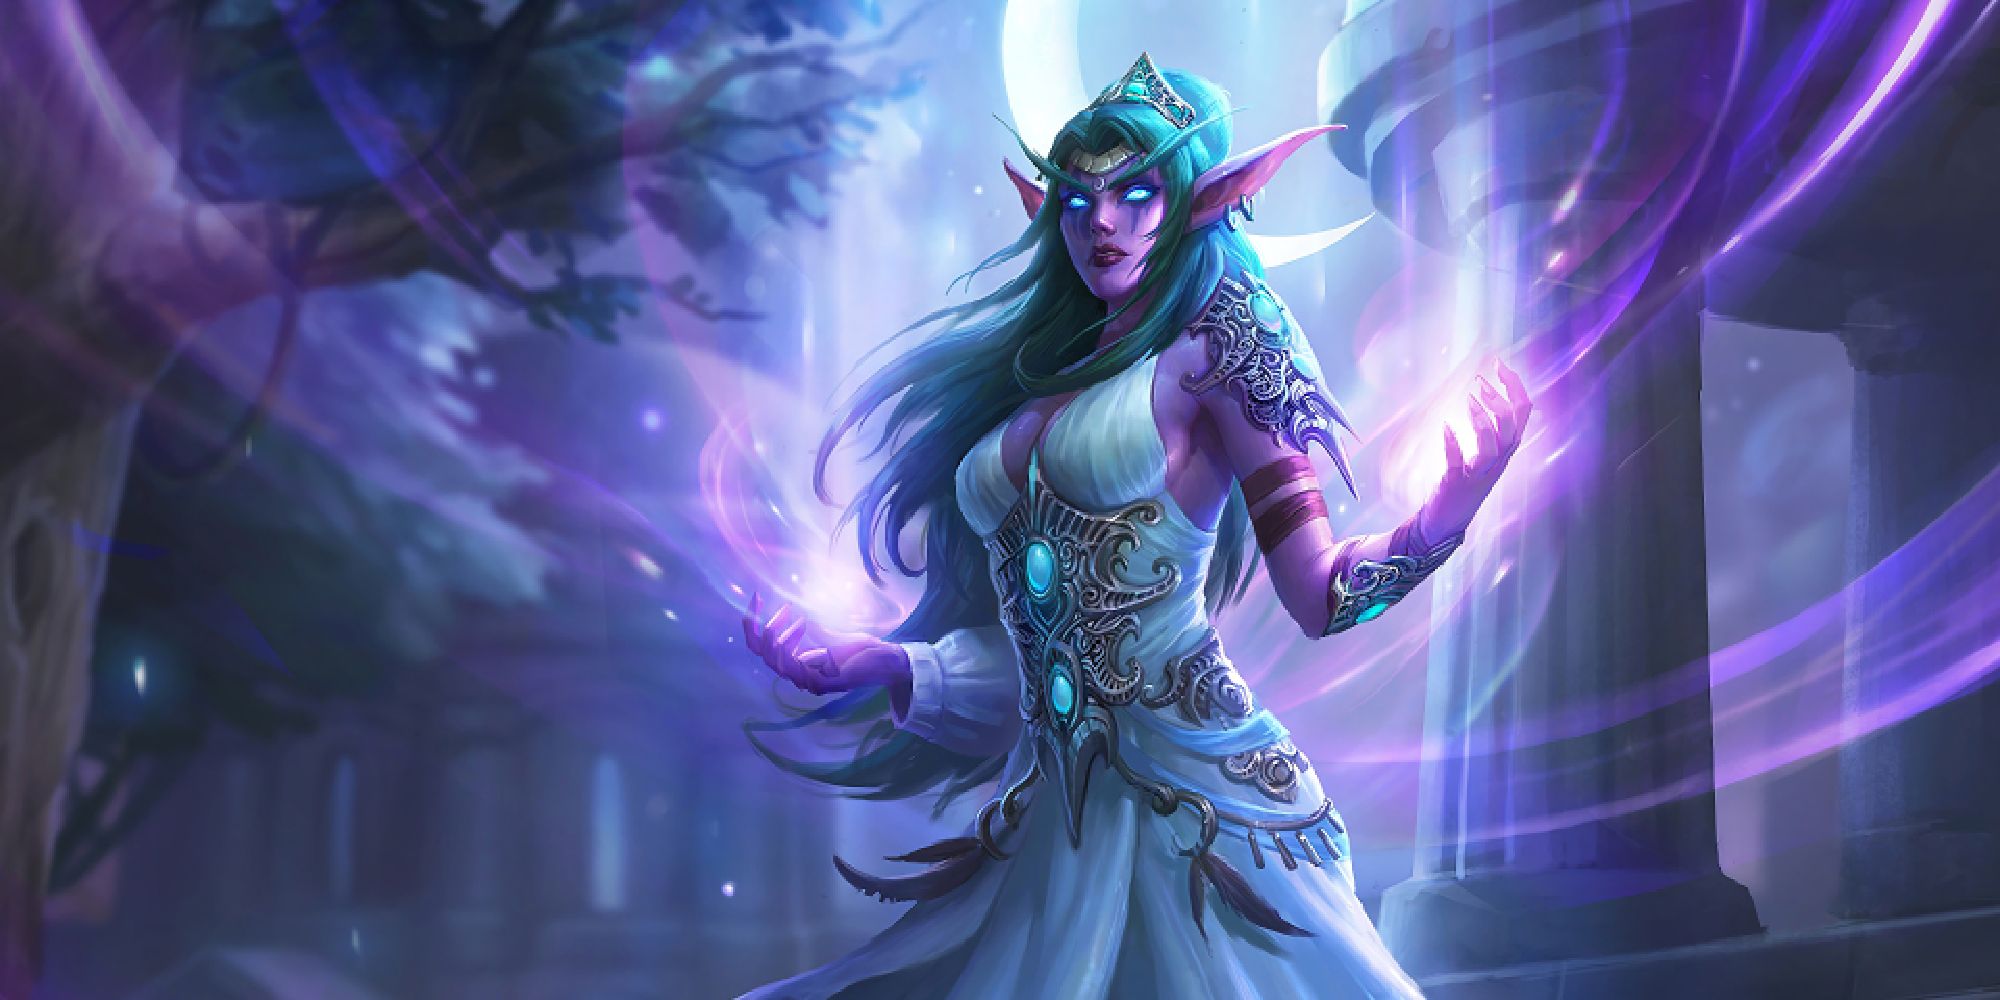 Tyrande Whisperwind from WoW with ethereal background